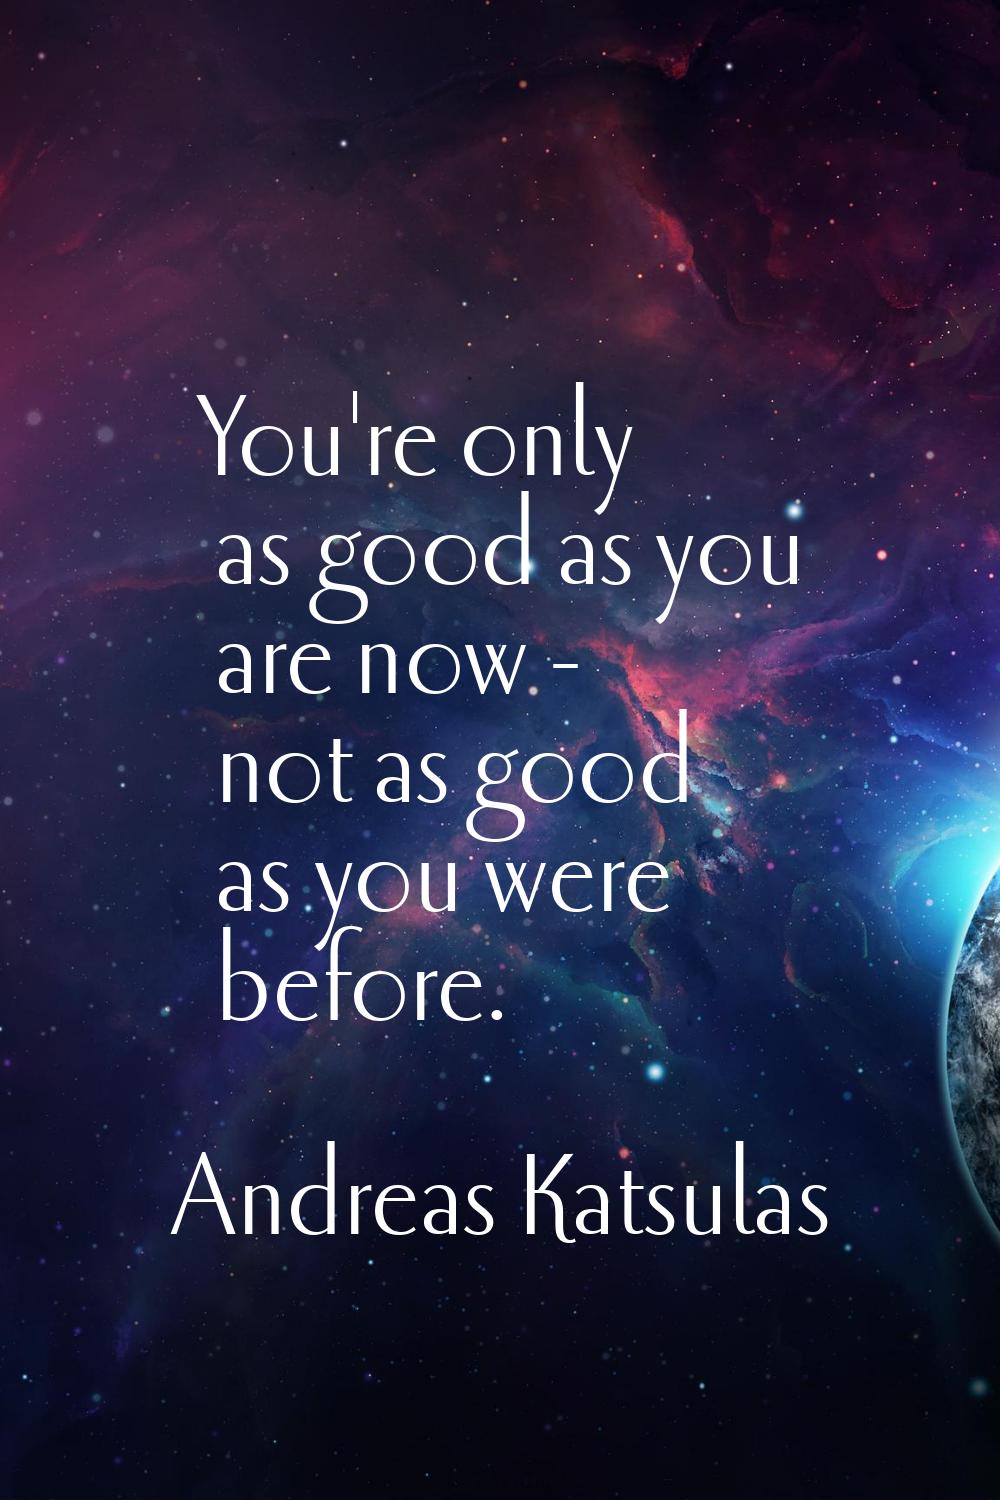 You're only as good as you are now - not as good as you were before.